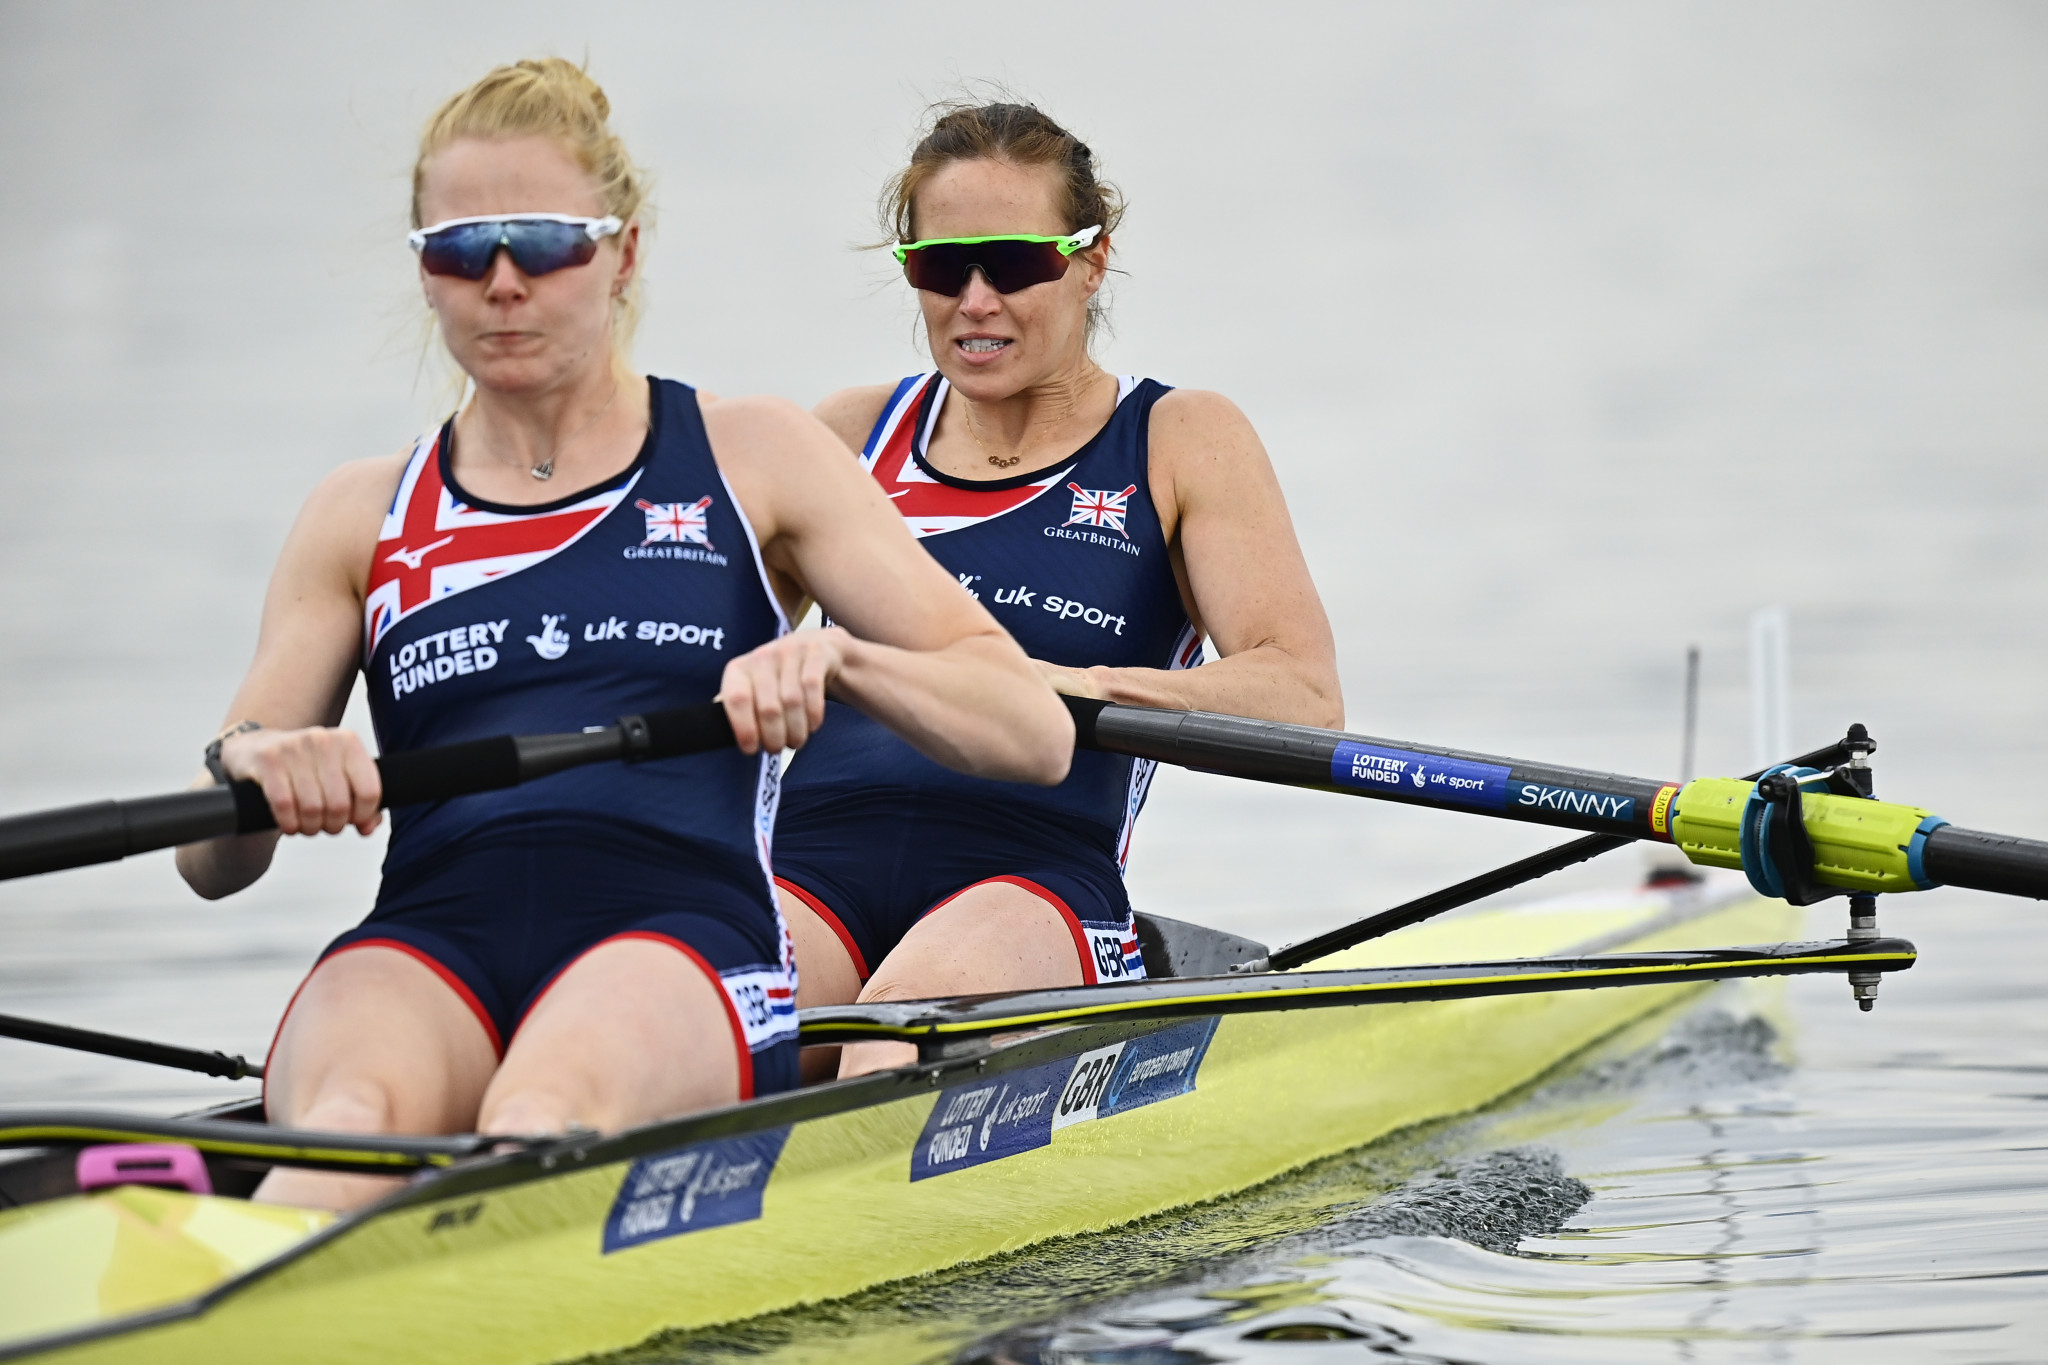 Glover impresses on return to action at European Rowing Championships